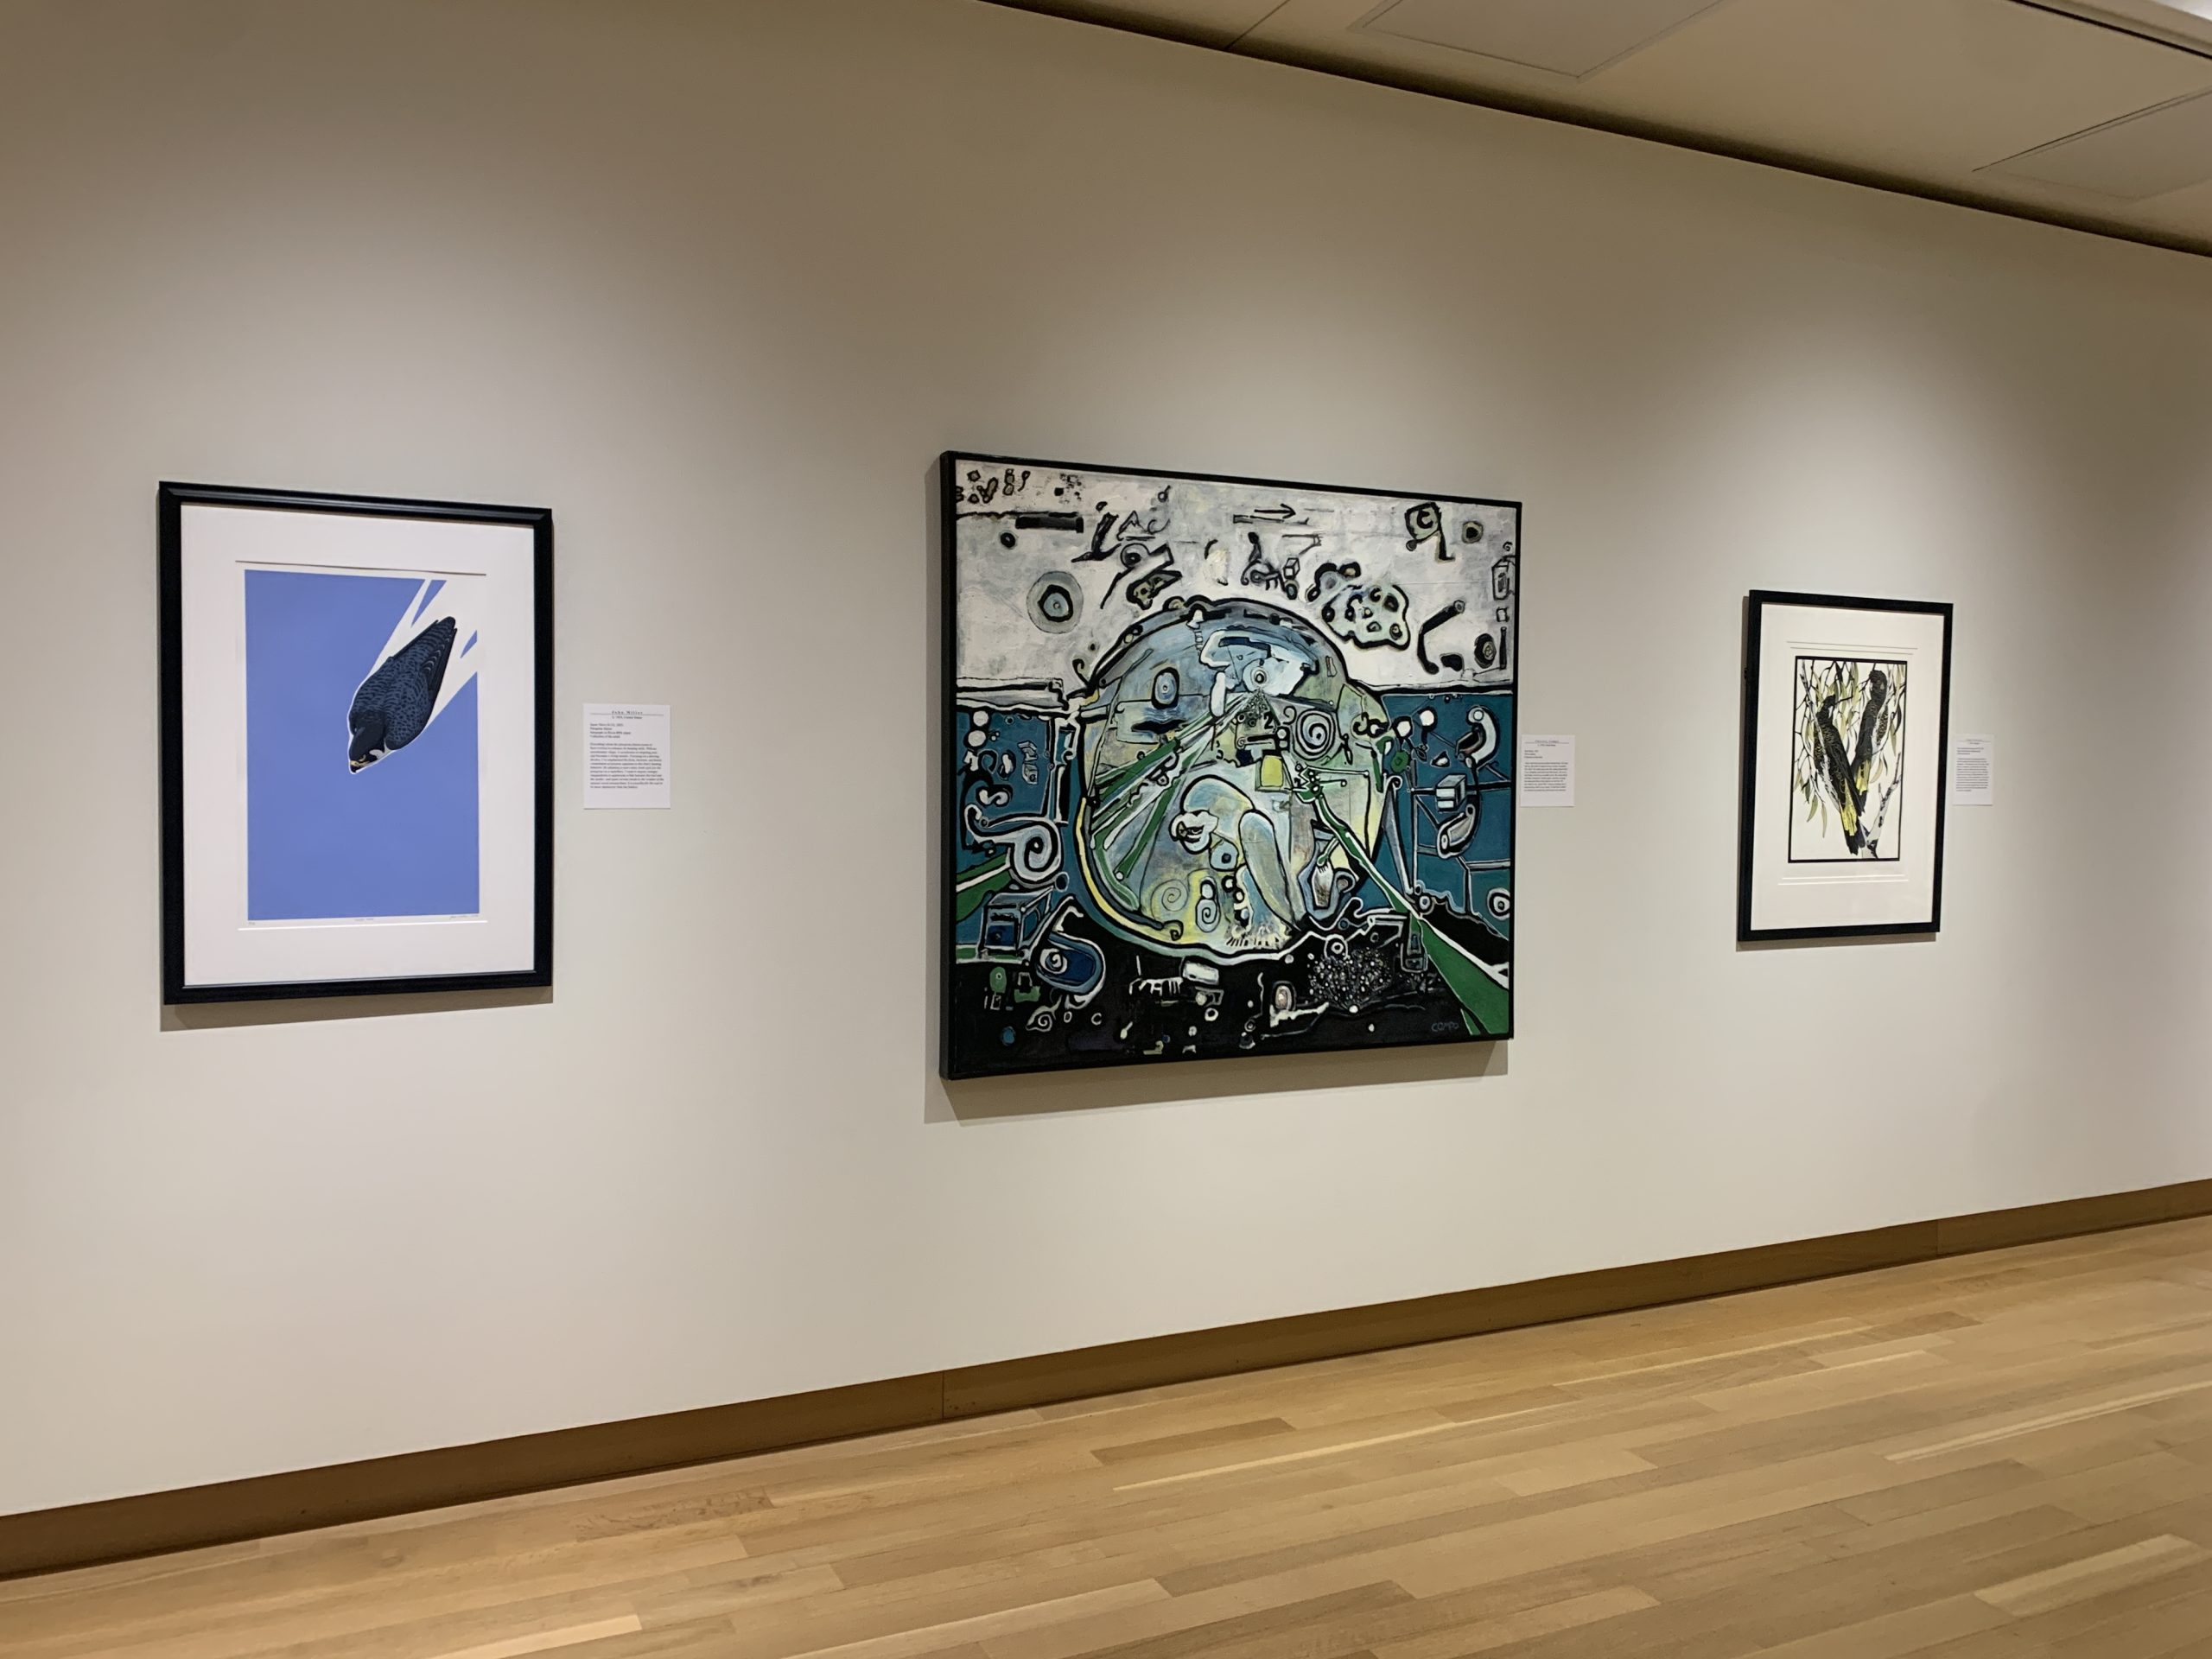 Three artworks from Birds in Art 2022 hang on the gallery wall. (left) A serigraph with a blue background features a Peregrine falcon darting down from the top right corner. (center) A large abstract painting with with blues and greens shows a parakeet surrounded by a circle and surrounded by geometric shapes. (right) A linocut depicts two Cockatoos in a black and yellow color scheme perched in a tree. 